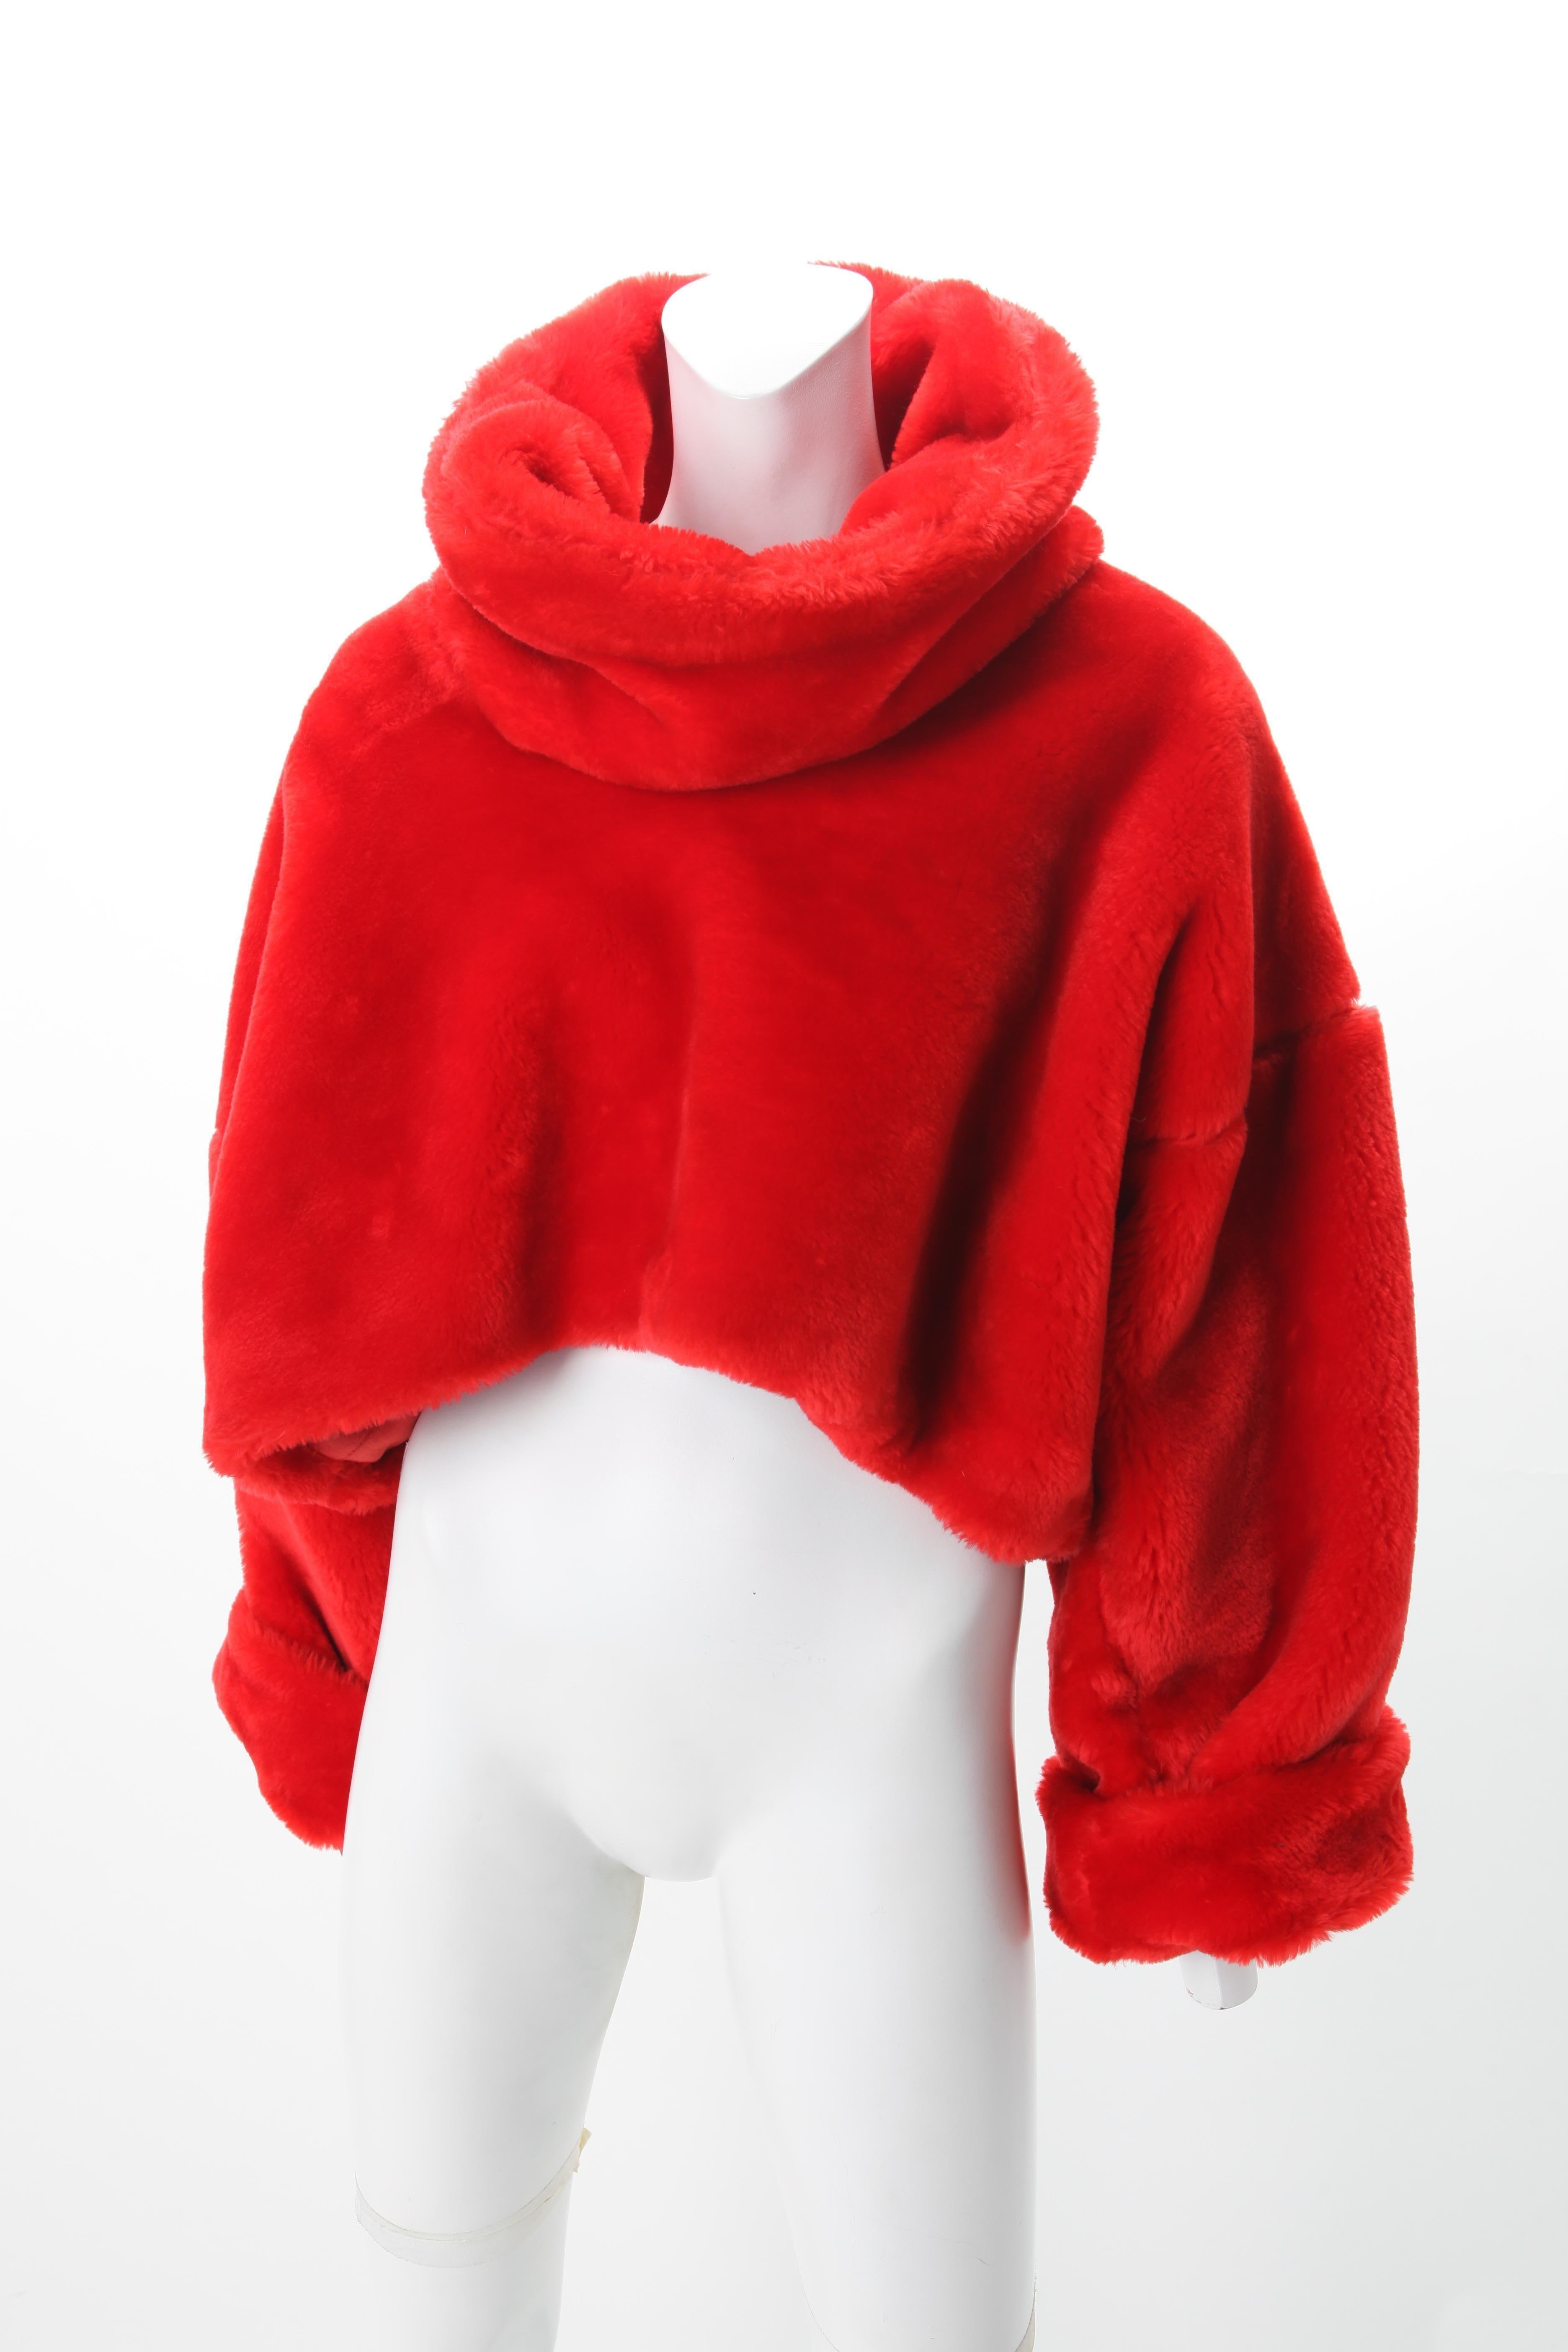 Patrick Kelly Red Faux Mouton Bodice with Funnel Collar, c.1980s.
Patrick Kelly Cropped red faux mouton oversize sweater with funnel collar.

Fit Size US 0 to 6 